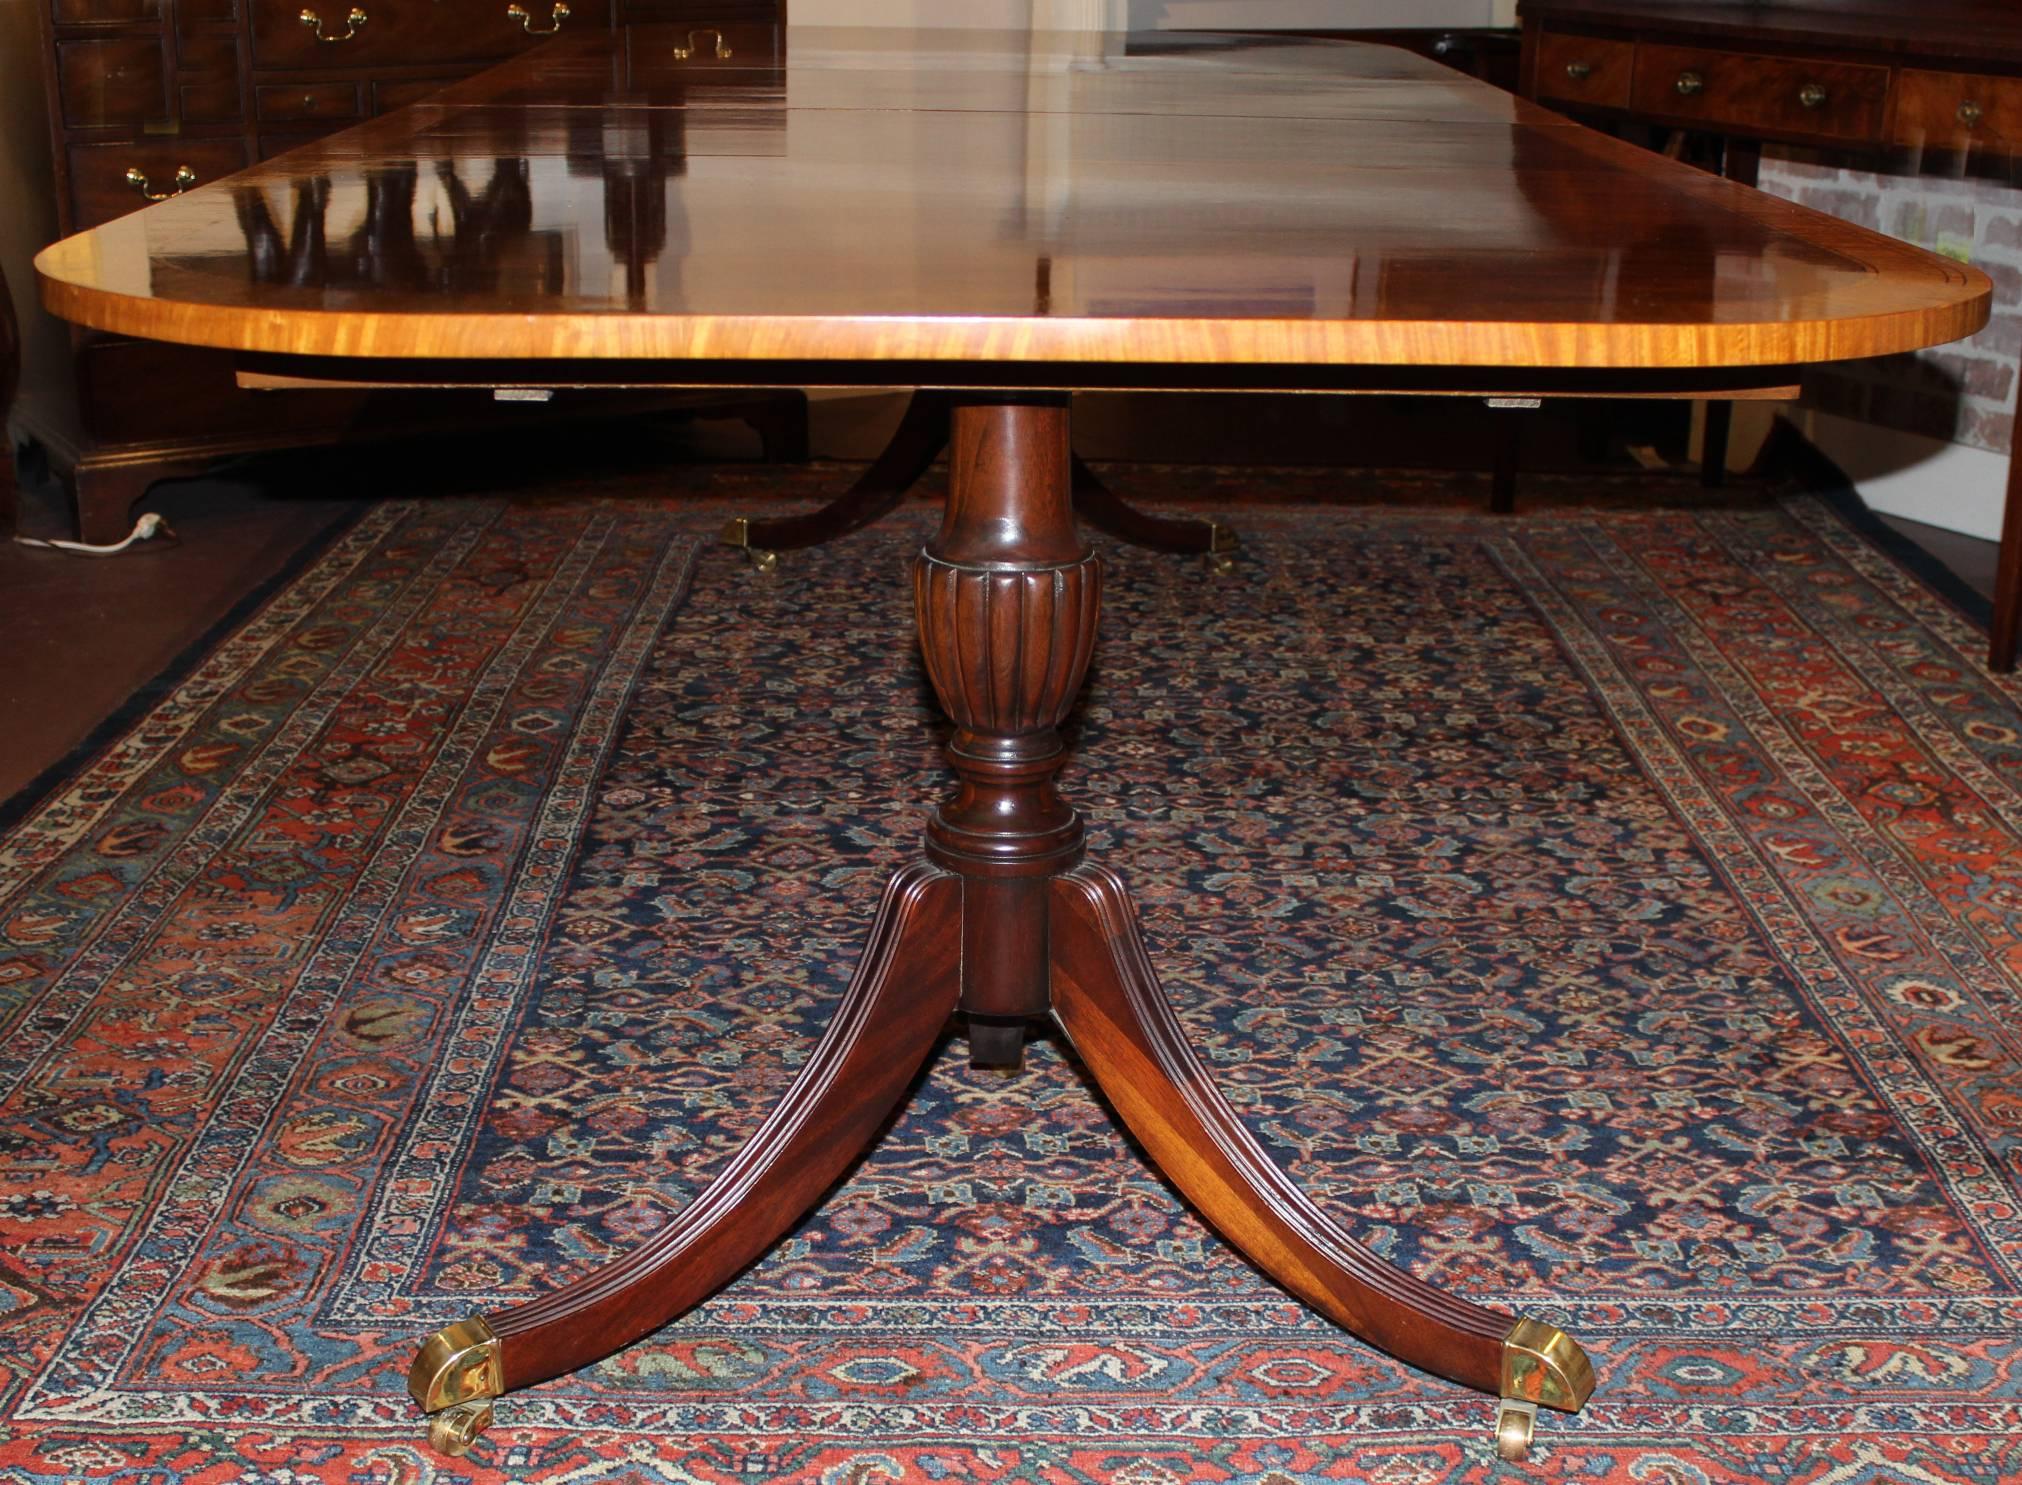 A splendid rectangle mahogany veneered double pedestal dining table, its top with rounded corners and a satinwood double-banded border, each pedestal with three down swept legs terminating with brass capped casters. Two leaves included. Dates to the